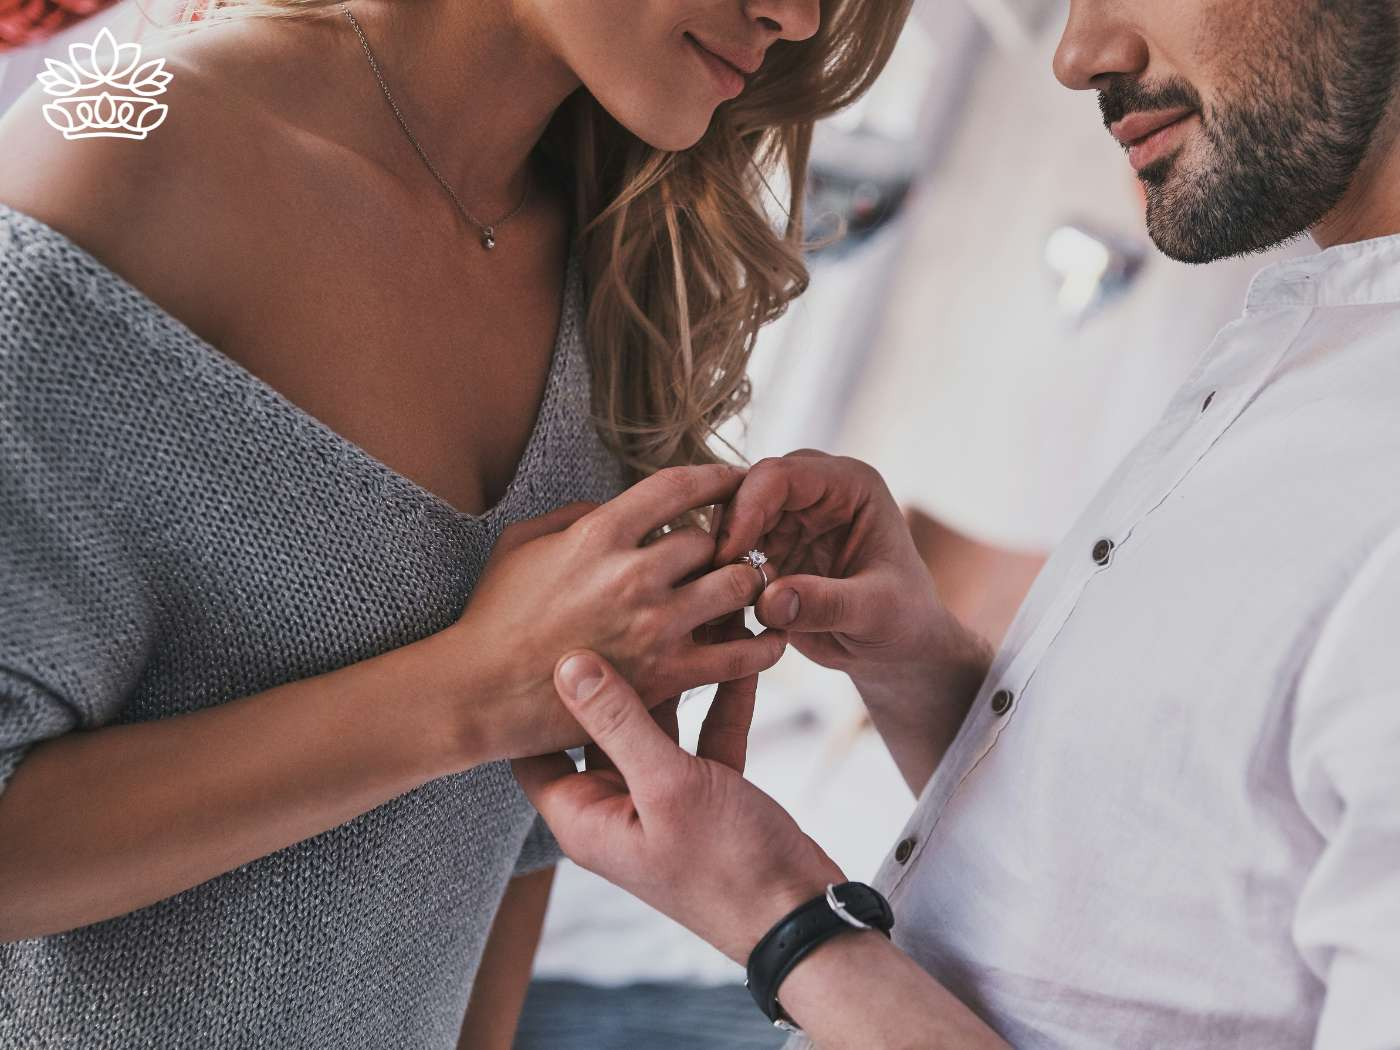 A close-up view of a man gently placing an engagement ring on a woman's finger, their intimate moment captured with warmth and affection. This beautiful engagement scene is complemented by the Engagement Gift Boxes Collection from Fabulous Flowers and Gifts, designed to celebrate such significant life events.